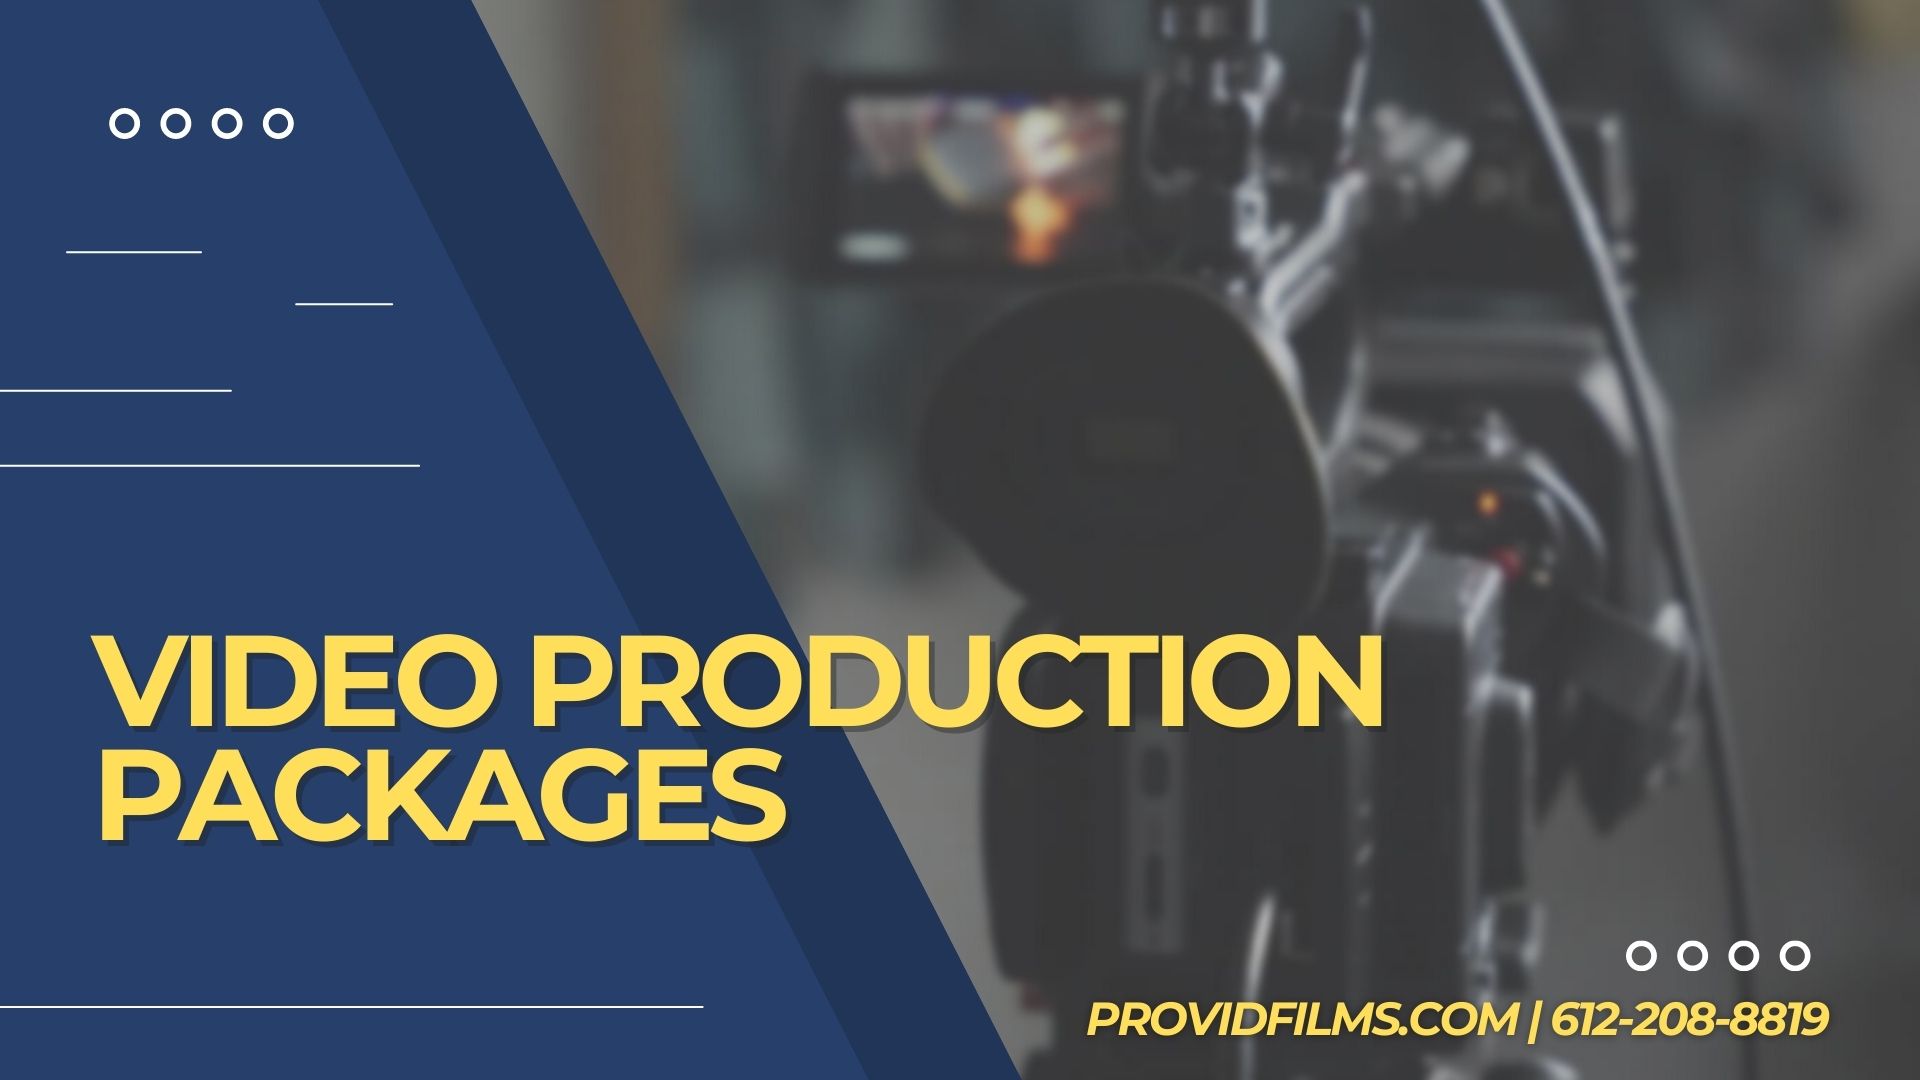 video production packages graphic<br />
